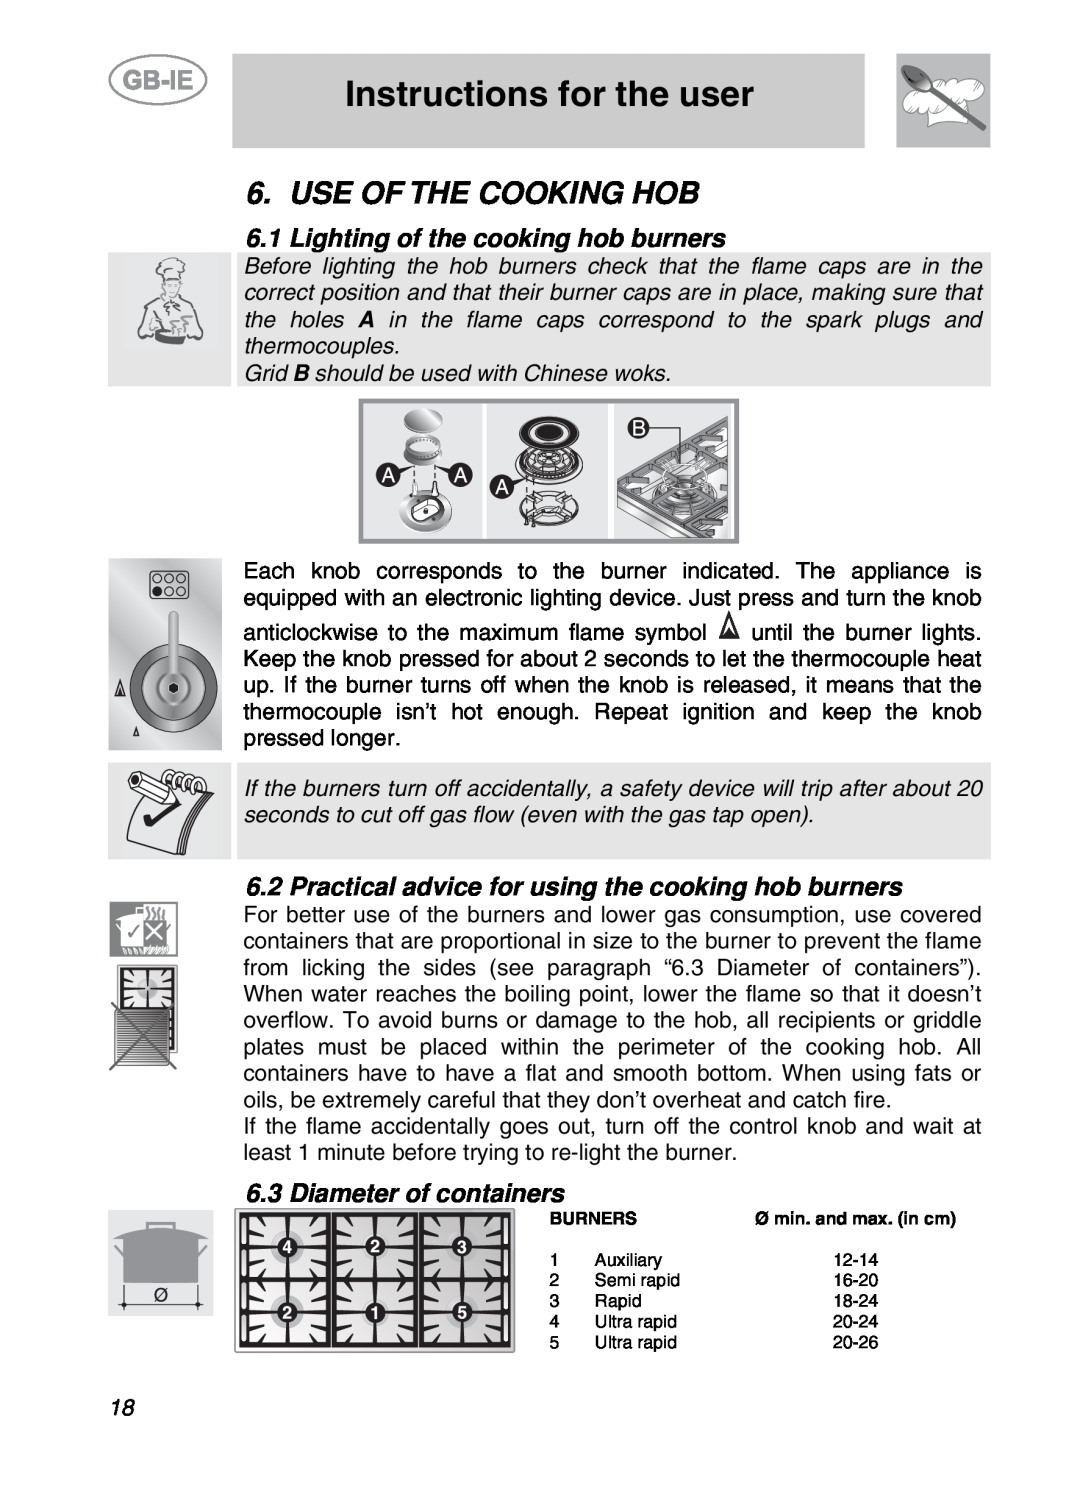 Smeg A2EA Use Of The Cooking Hob, Lighting of the cooking hob burners, Diameter of containers, Instructions for the user 